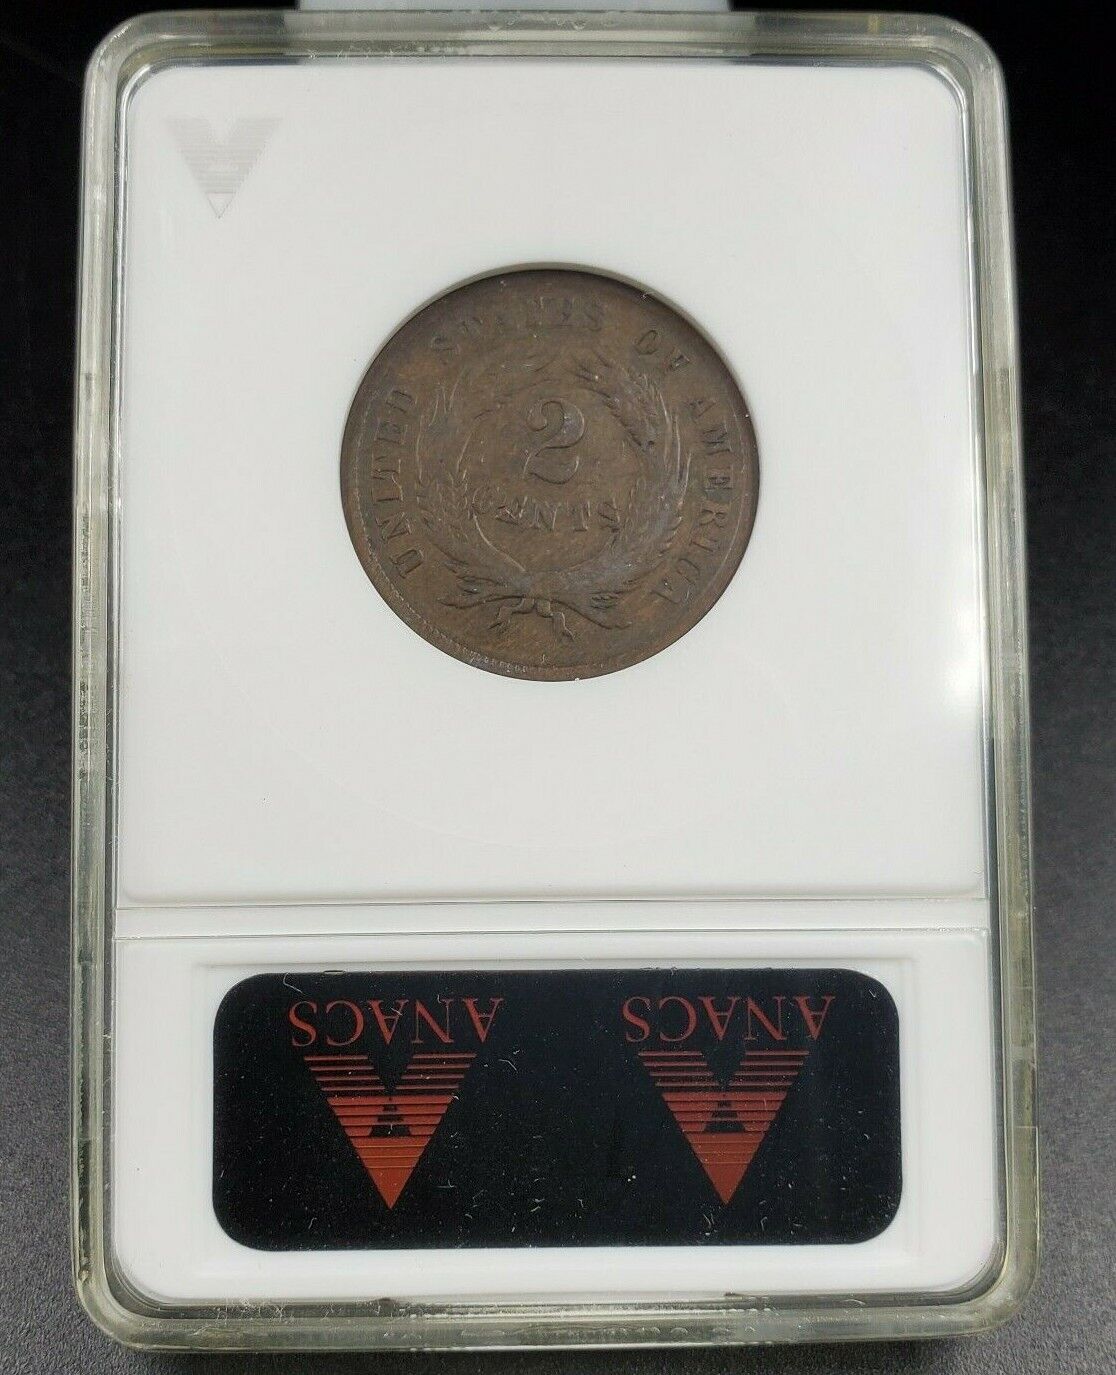 1864 2c Liberty Two Cent Coin ANACS VG08 FS-1302 Breen-2373 18/18 RPD Variety